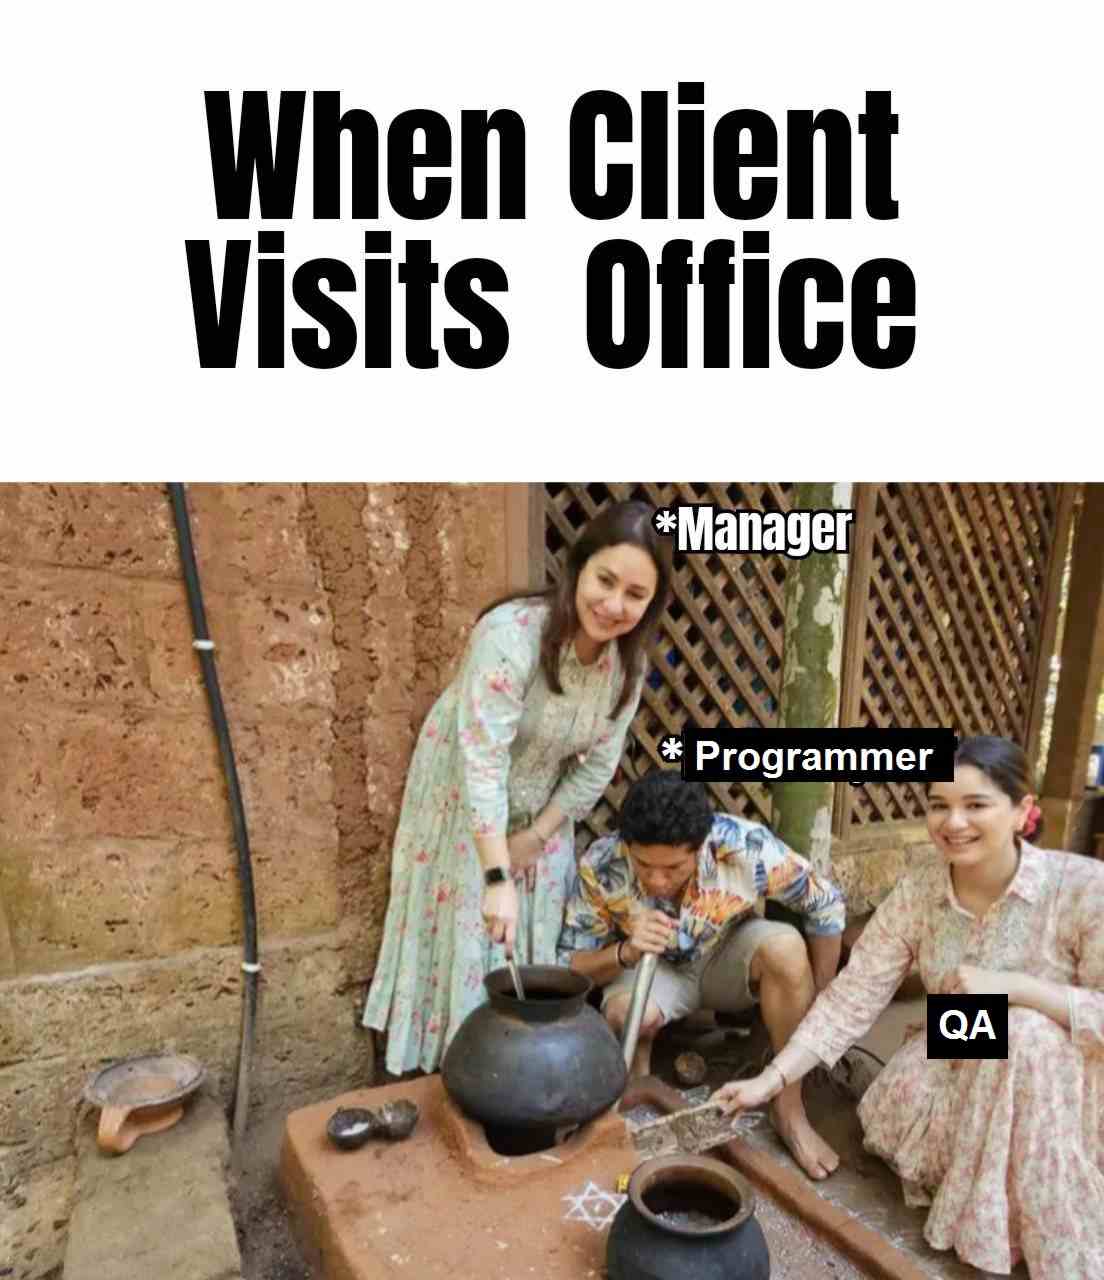 When client visits office